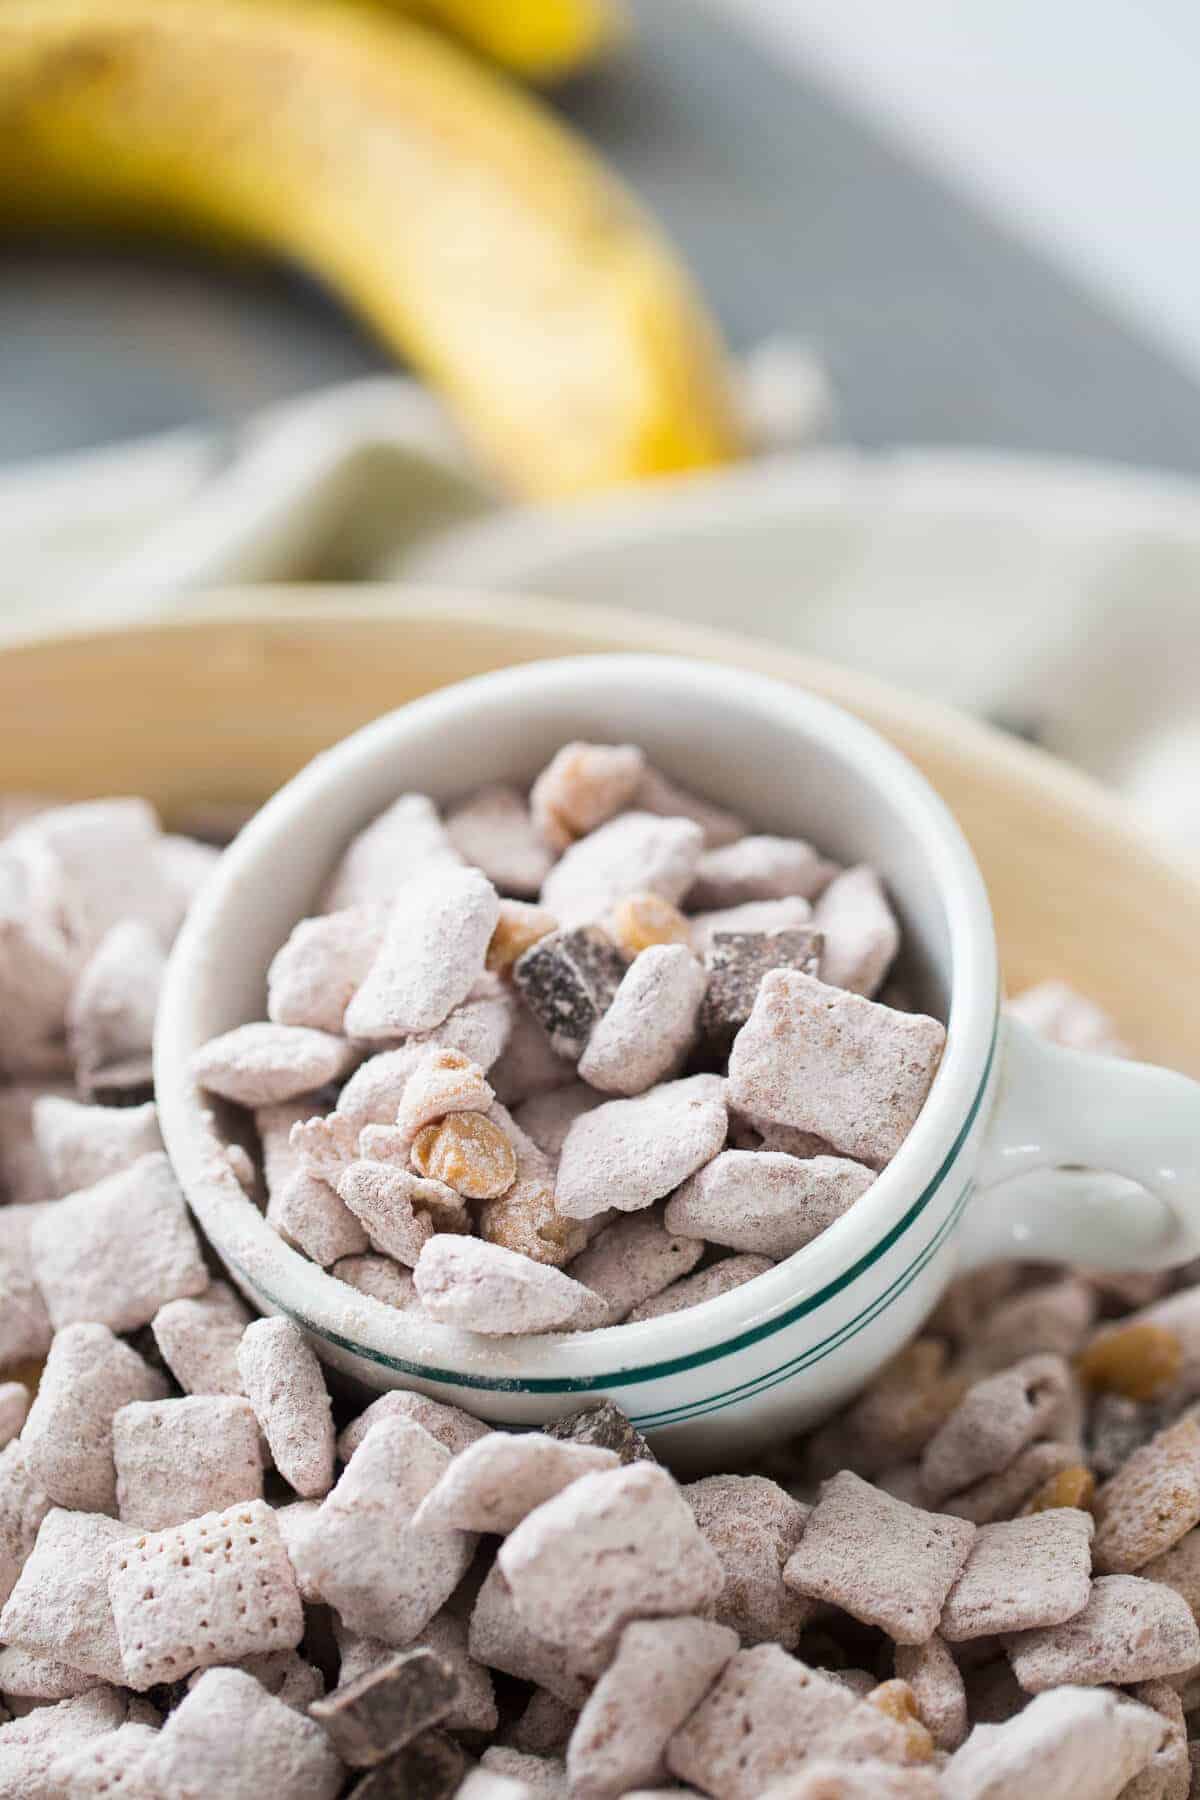 These chunky monkey muddy buddies are not only fun to eat, but they are simple to make!